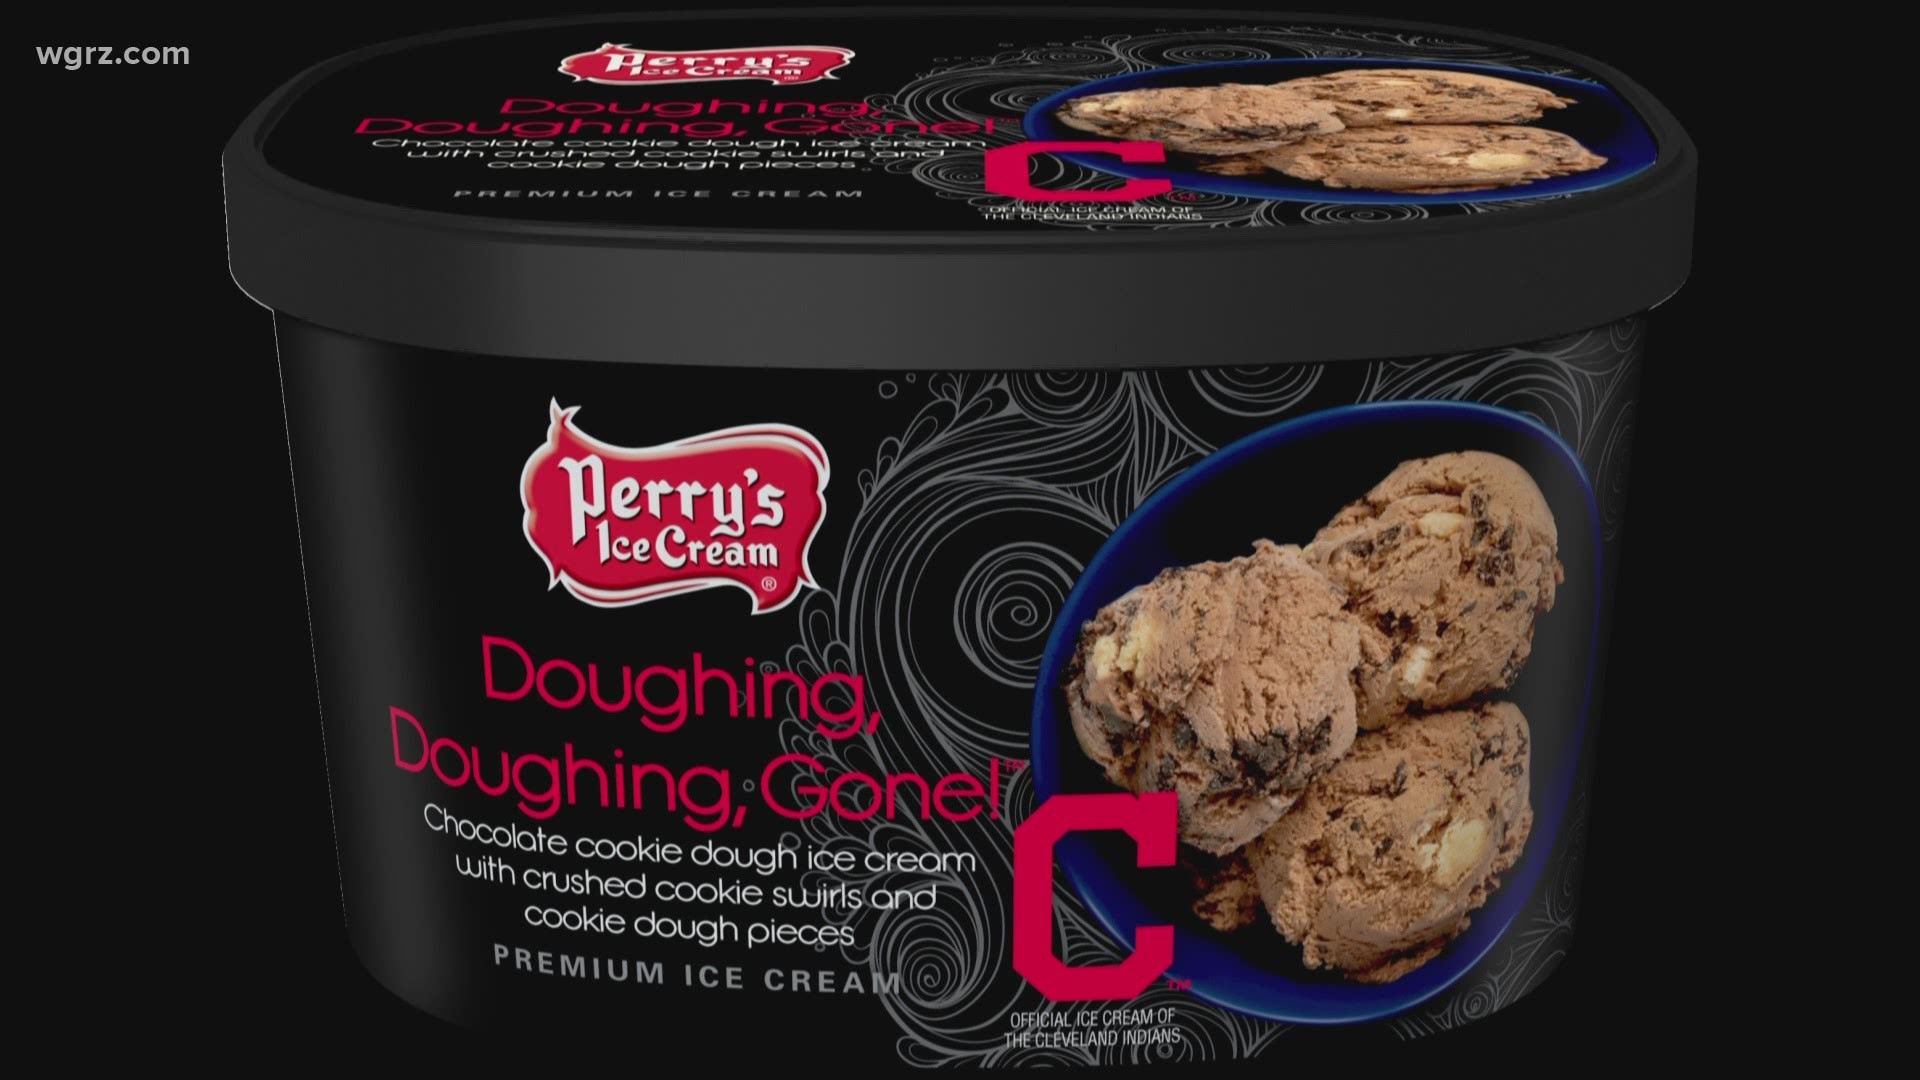 'Doughing, doughing, gone!' flavor ice cream